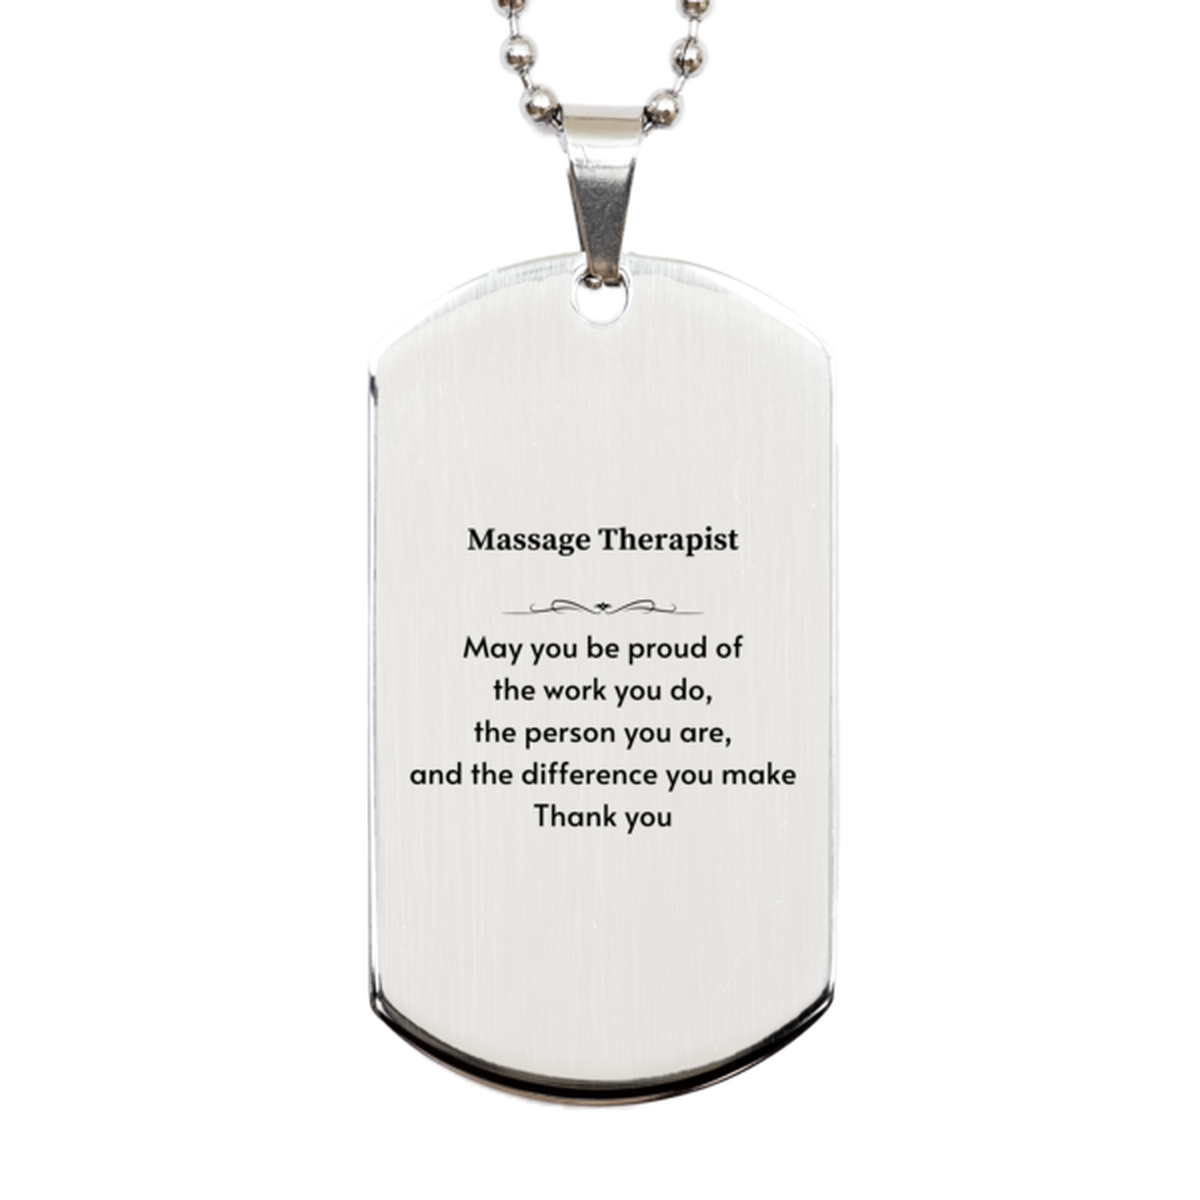 Heartwarming Silver Dog Tag Retirement Coworkers Gifts for Massage Therapist, Massage Therapist May You be proud of the work you do, the person you are Gifts for Boss Men Women Friends